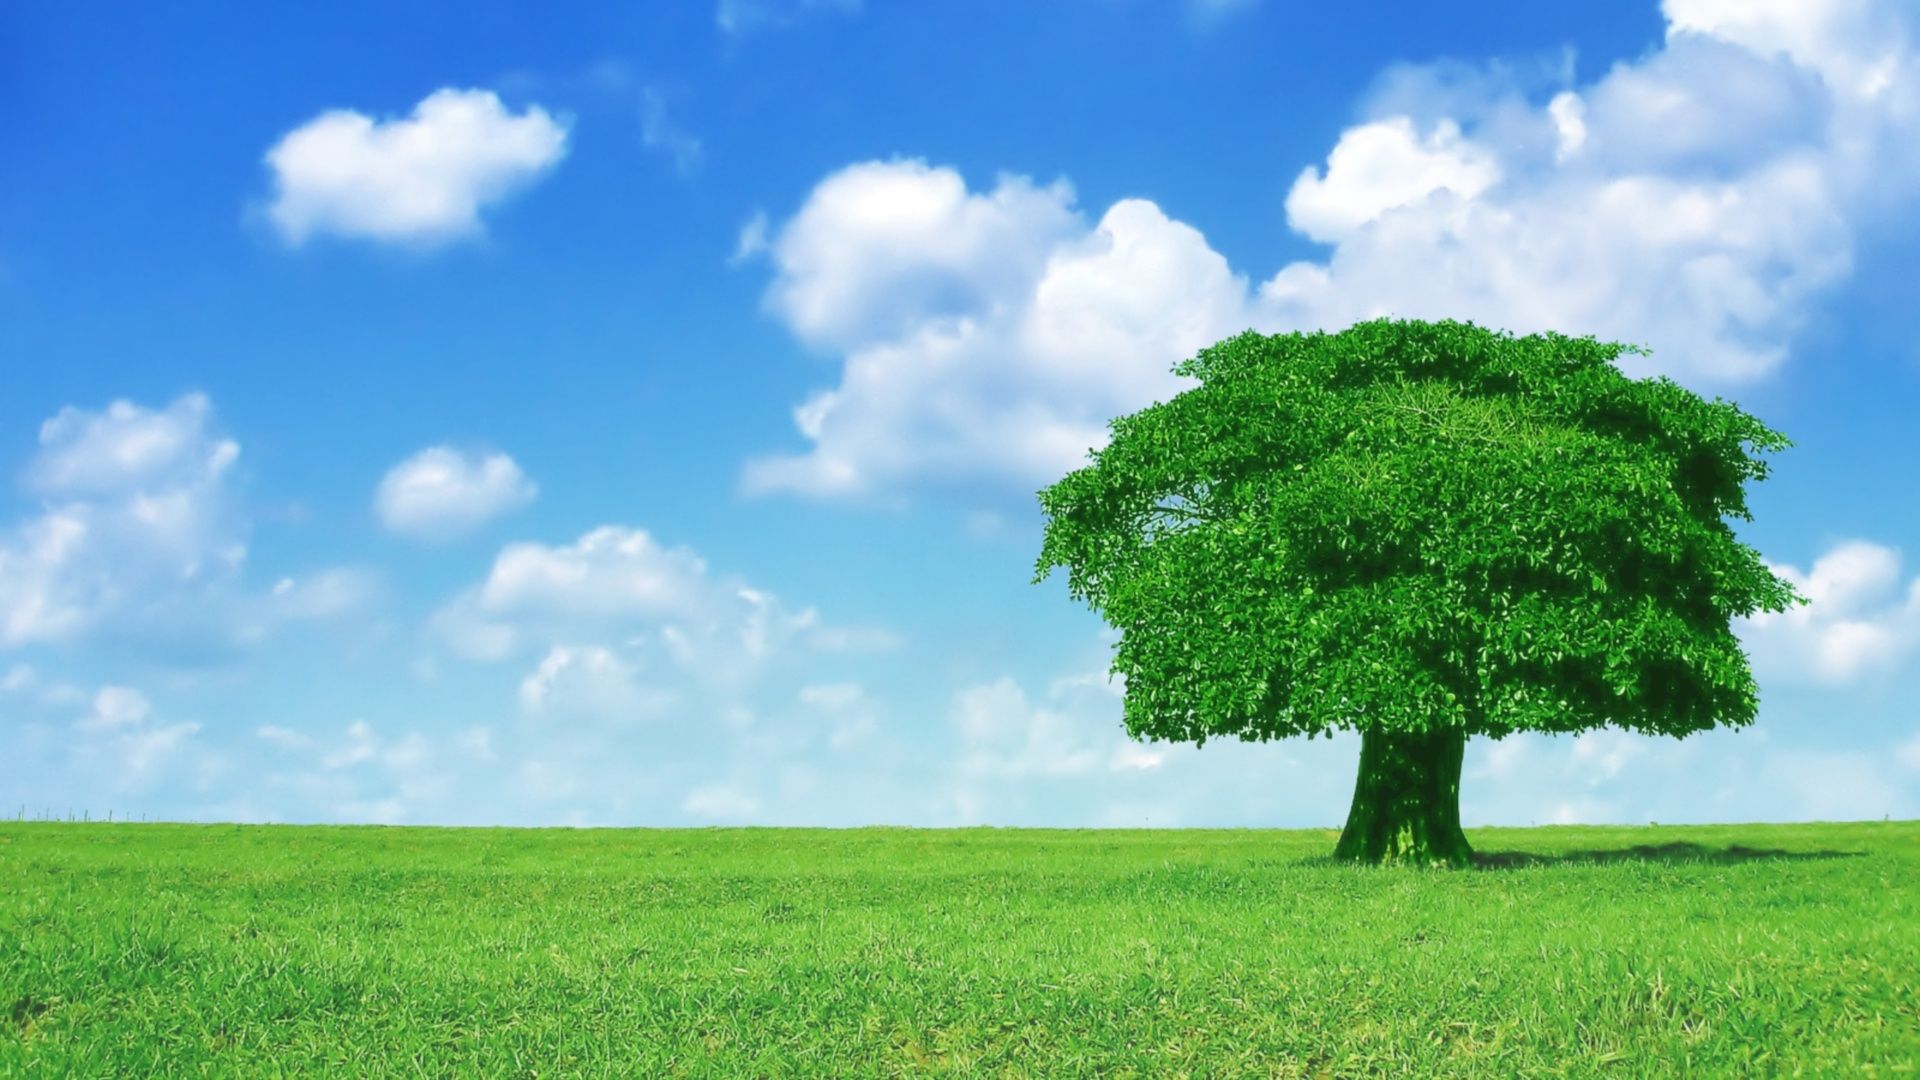 HD Tree Wallpaper Background For Free Download